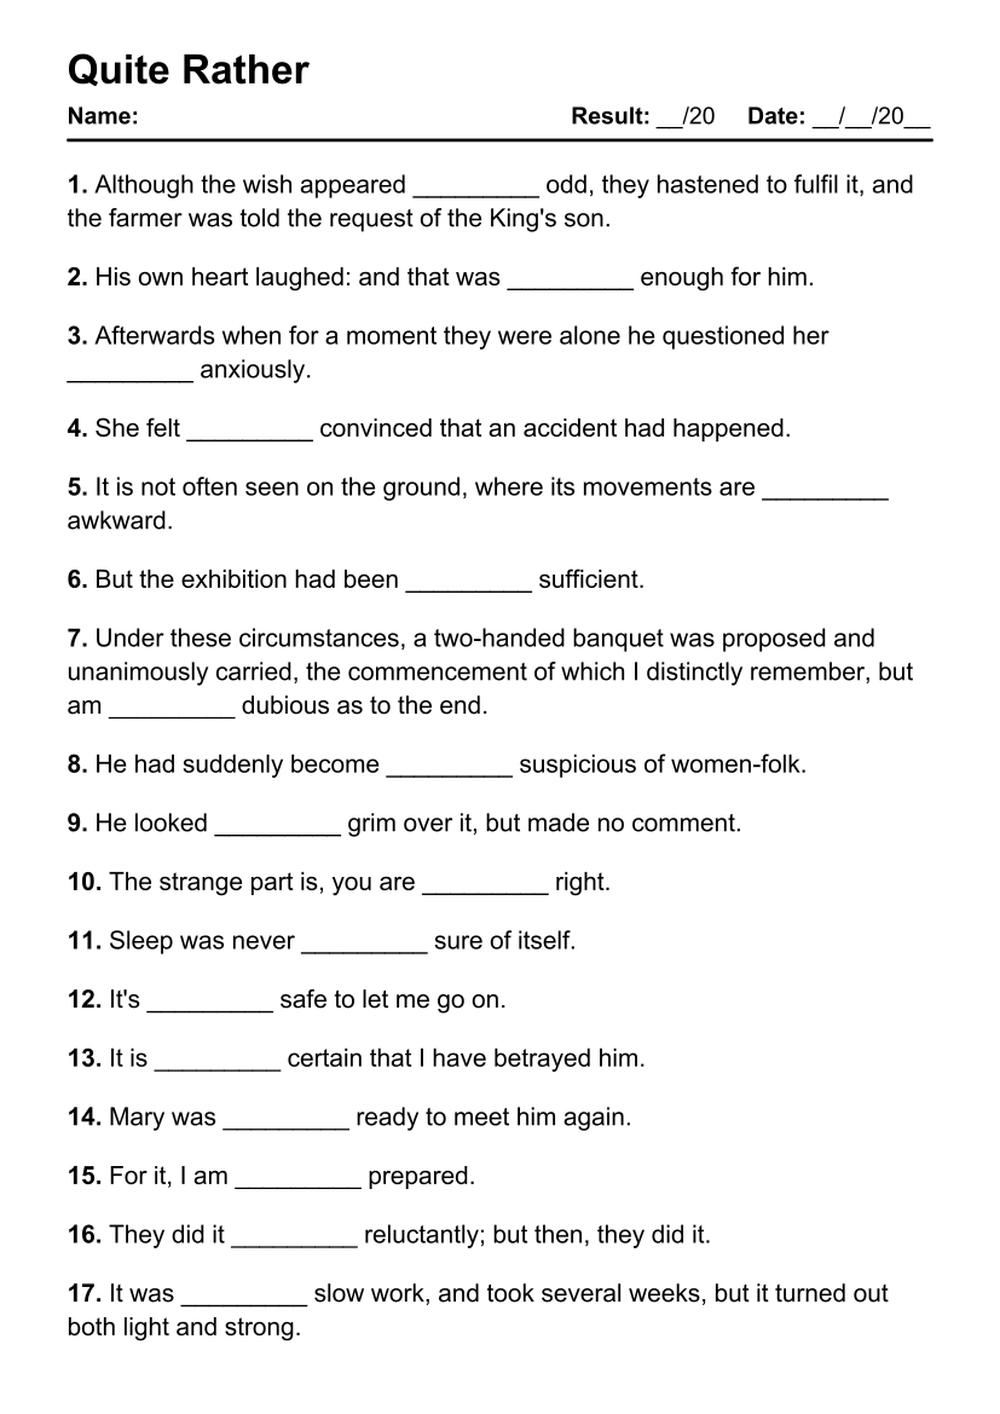 Printable Quite Rather Exercises - PDF Worksheet with Answers - Test 9